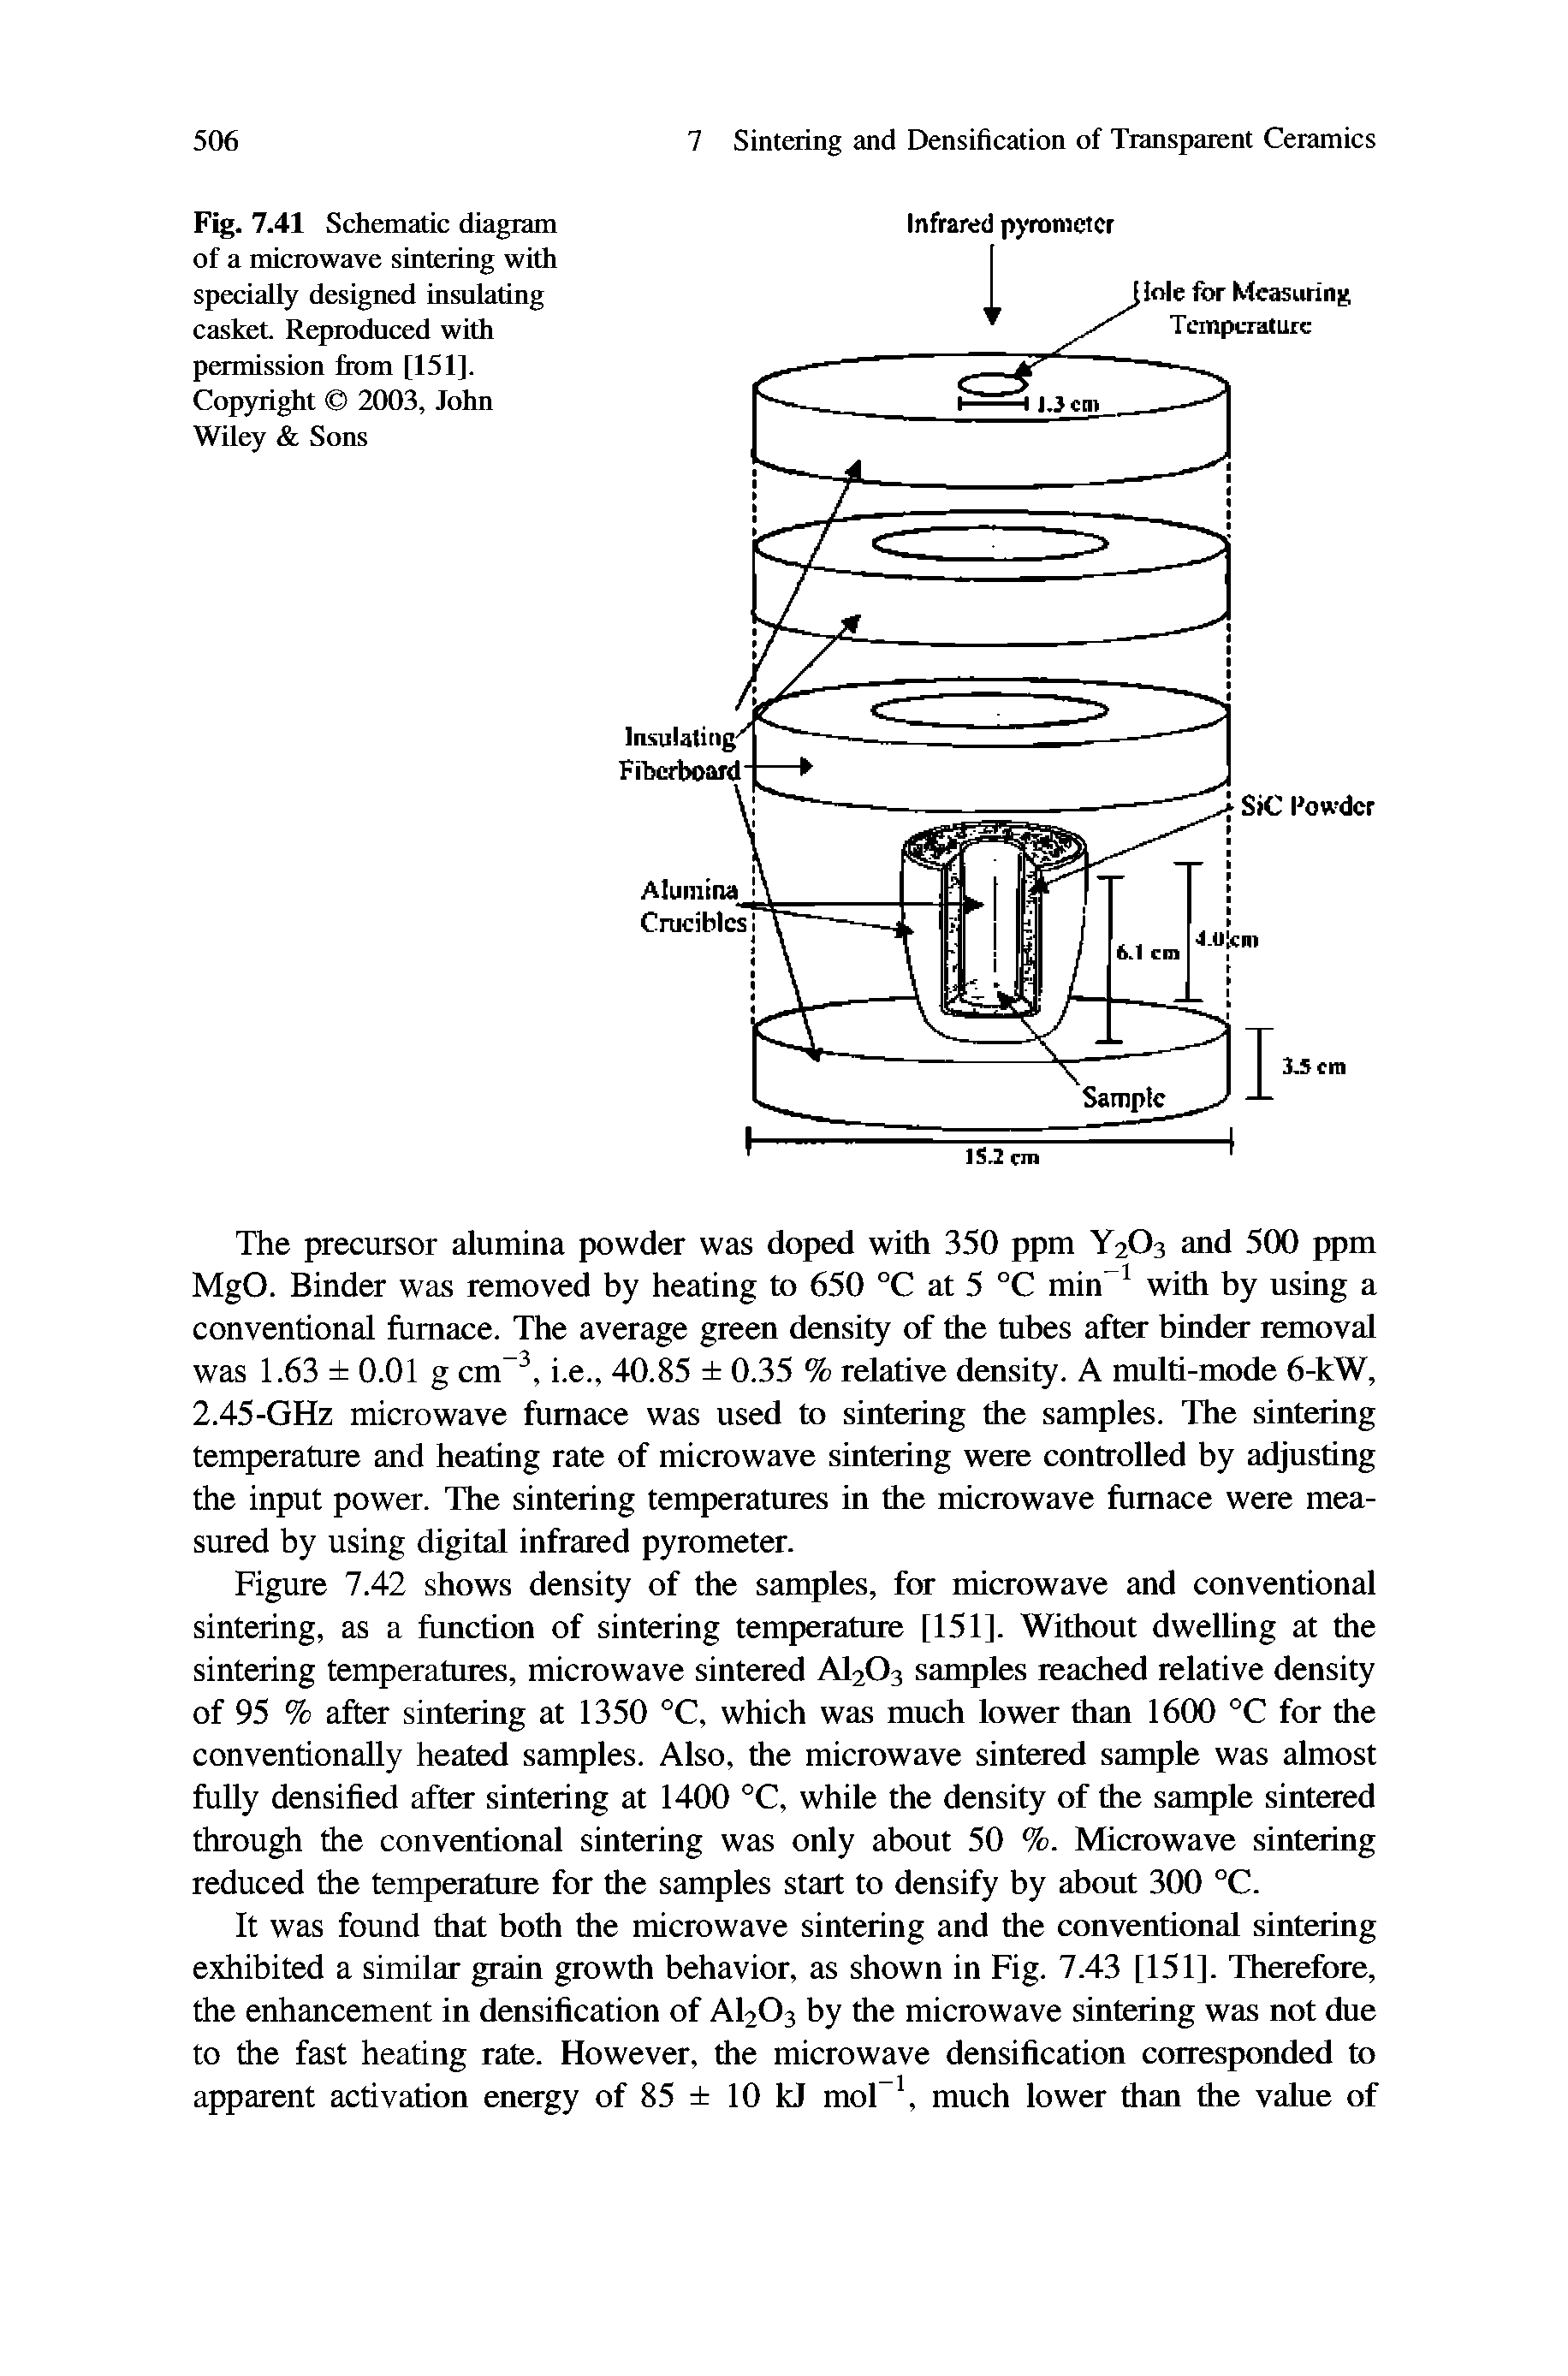 Fig. 7.41 Schematic diagram of a microwave sintering with specially designed insulating casket Reproduced with permission from [151]. Copyright 2003, John Wiley Sons...